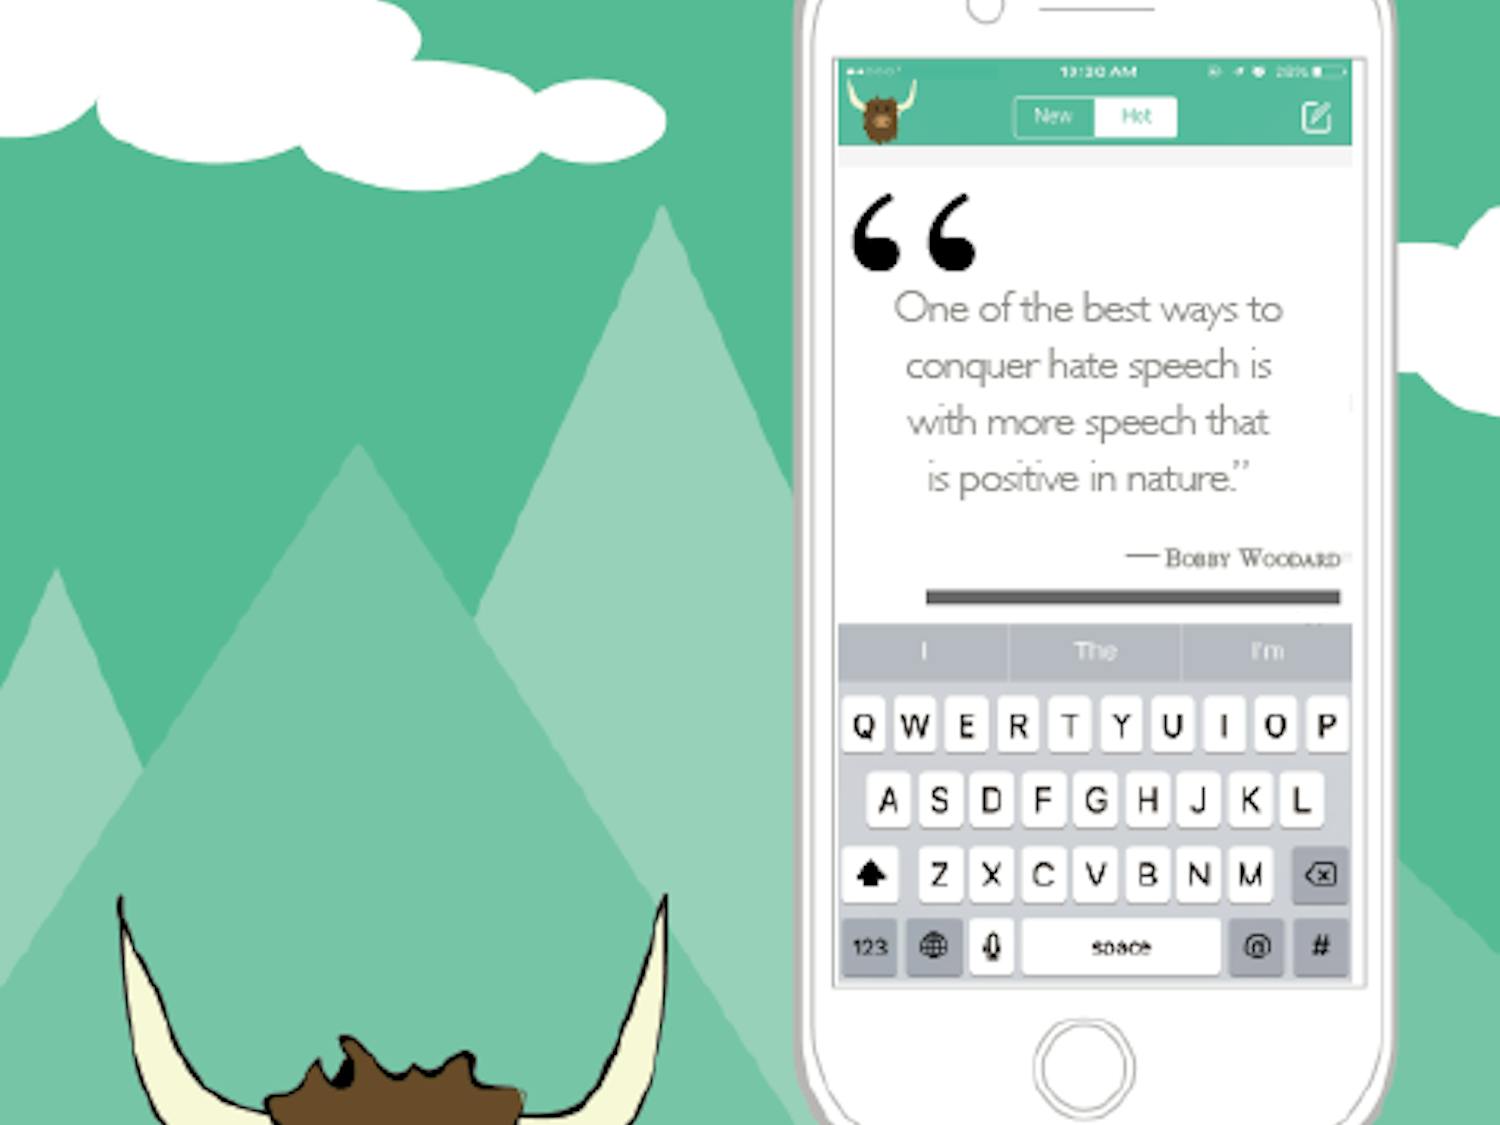 The University is making an effort to educate students about Yik Yak, according to Student Affairs VP Bobby Woodard.